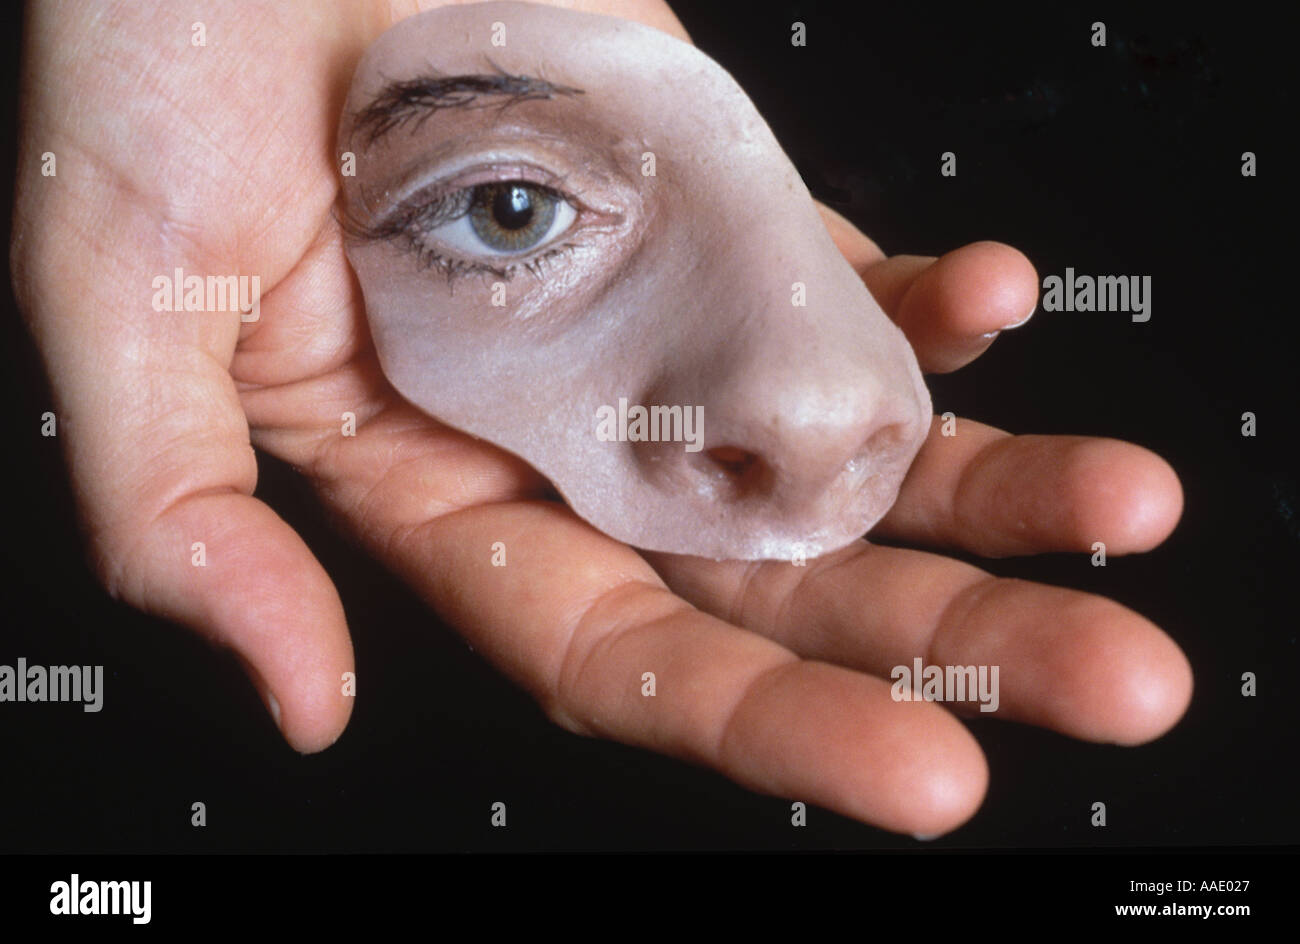 A hand holds a section of molded face used as a replacement for facial cancer surgery Stock Photo